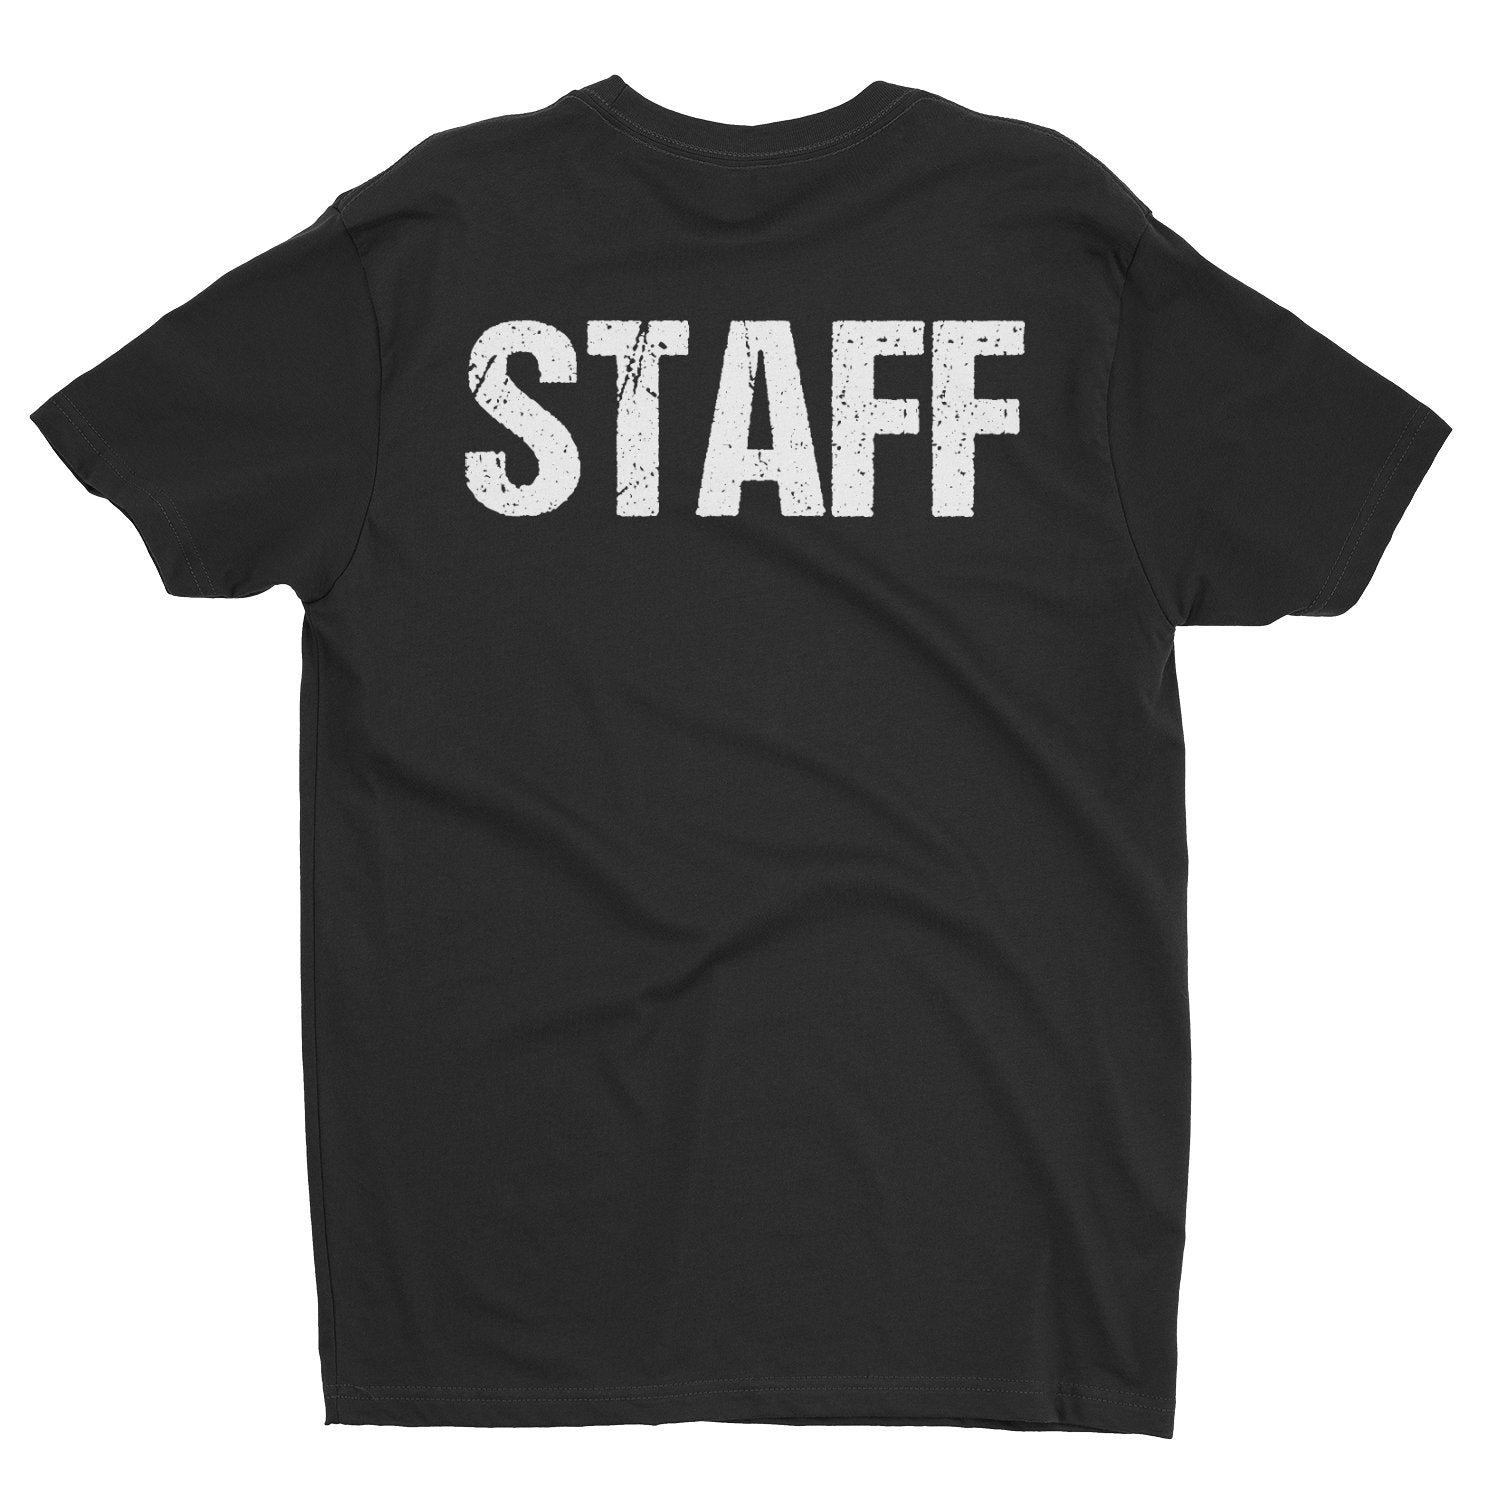 Men's Staff tee Design Screen Printed Front & Back (Distressed, Black & White)